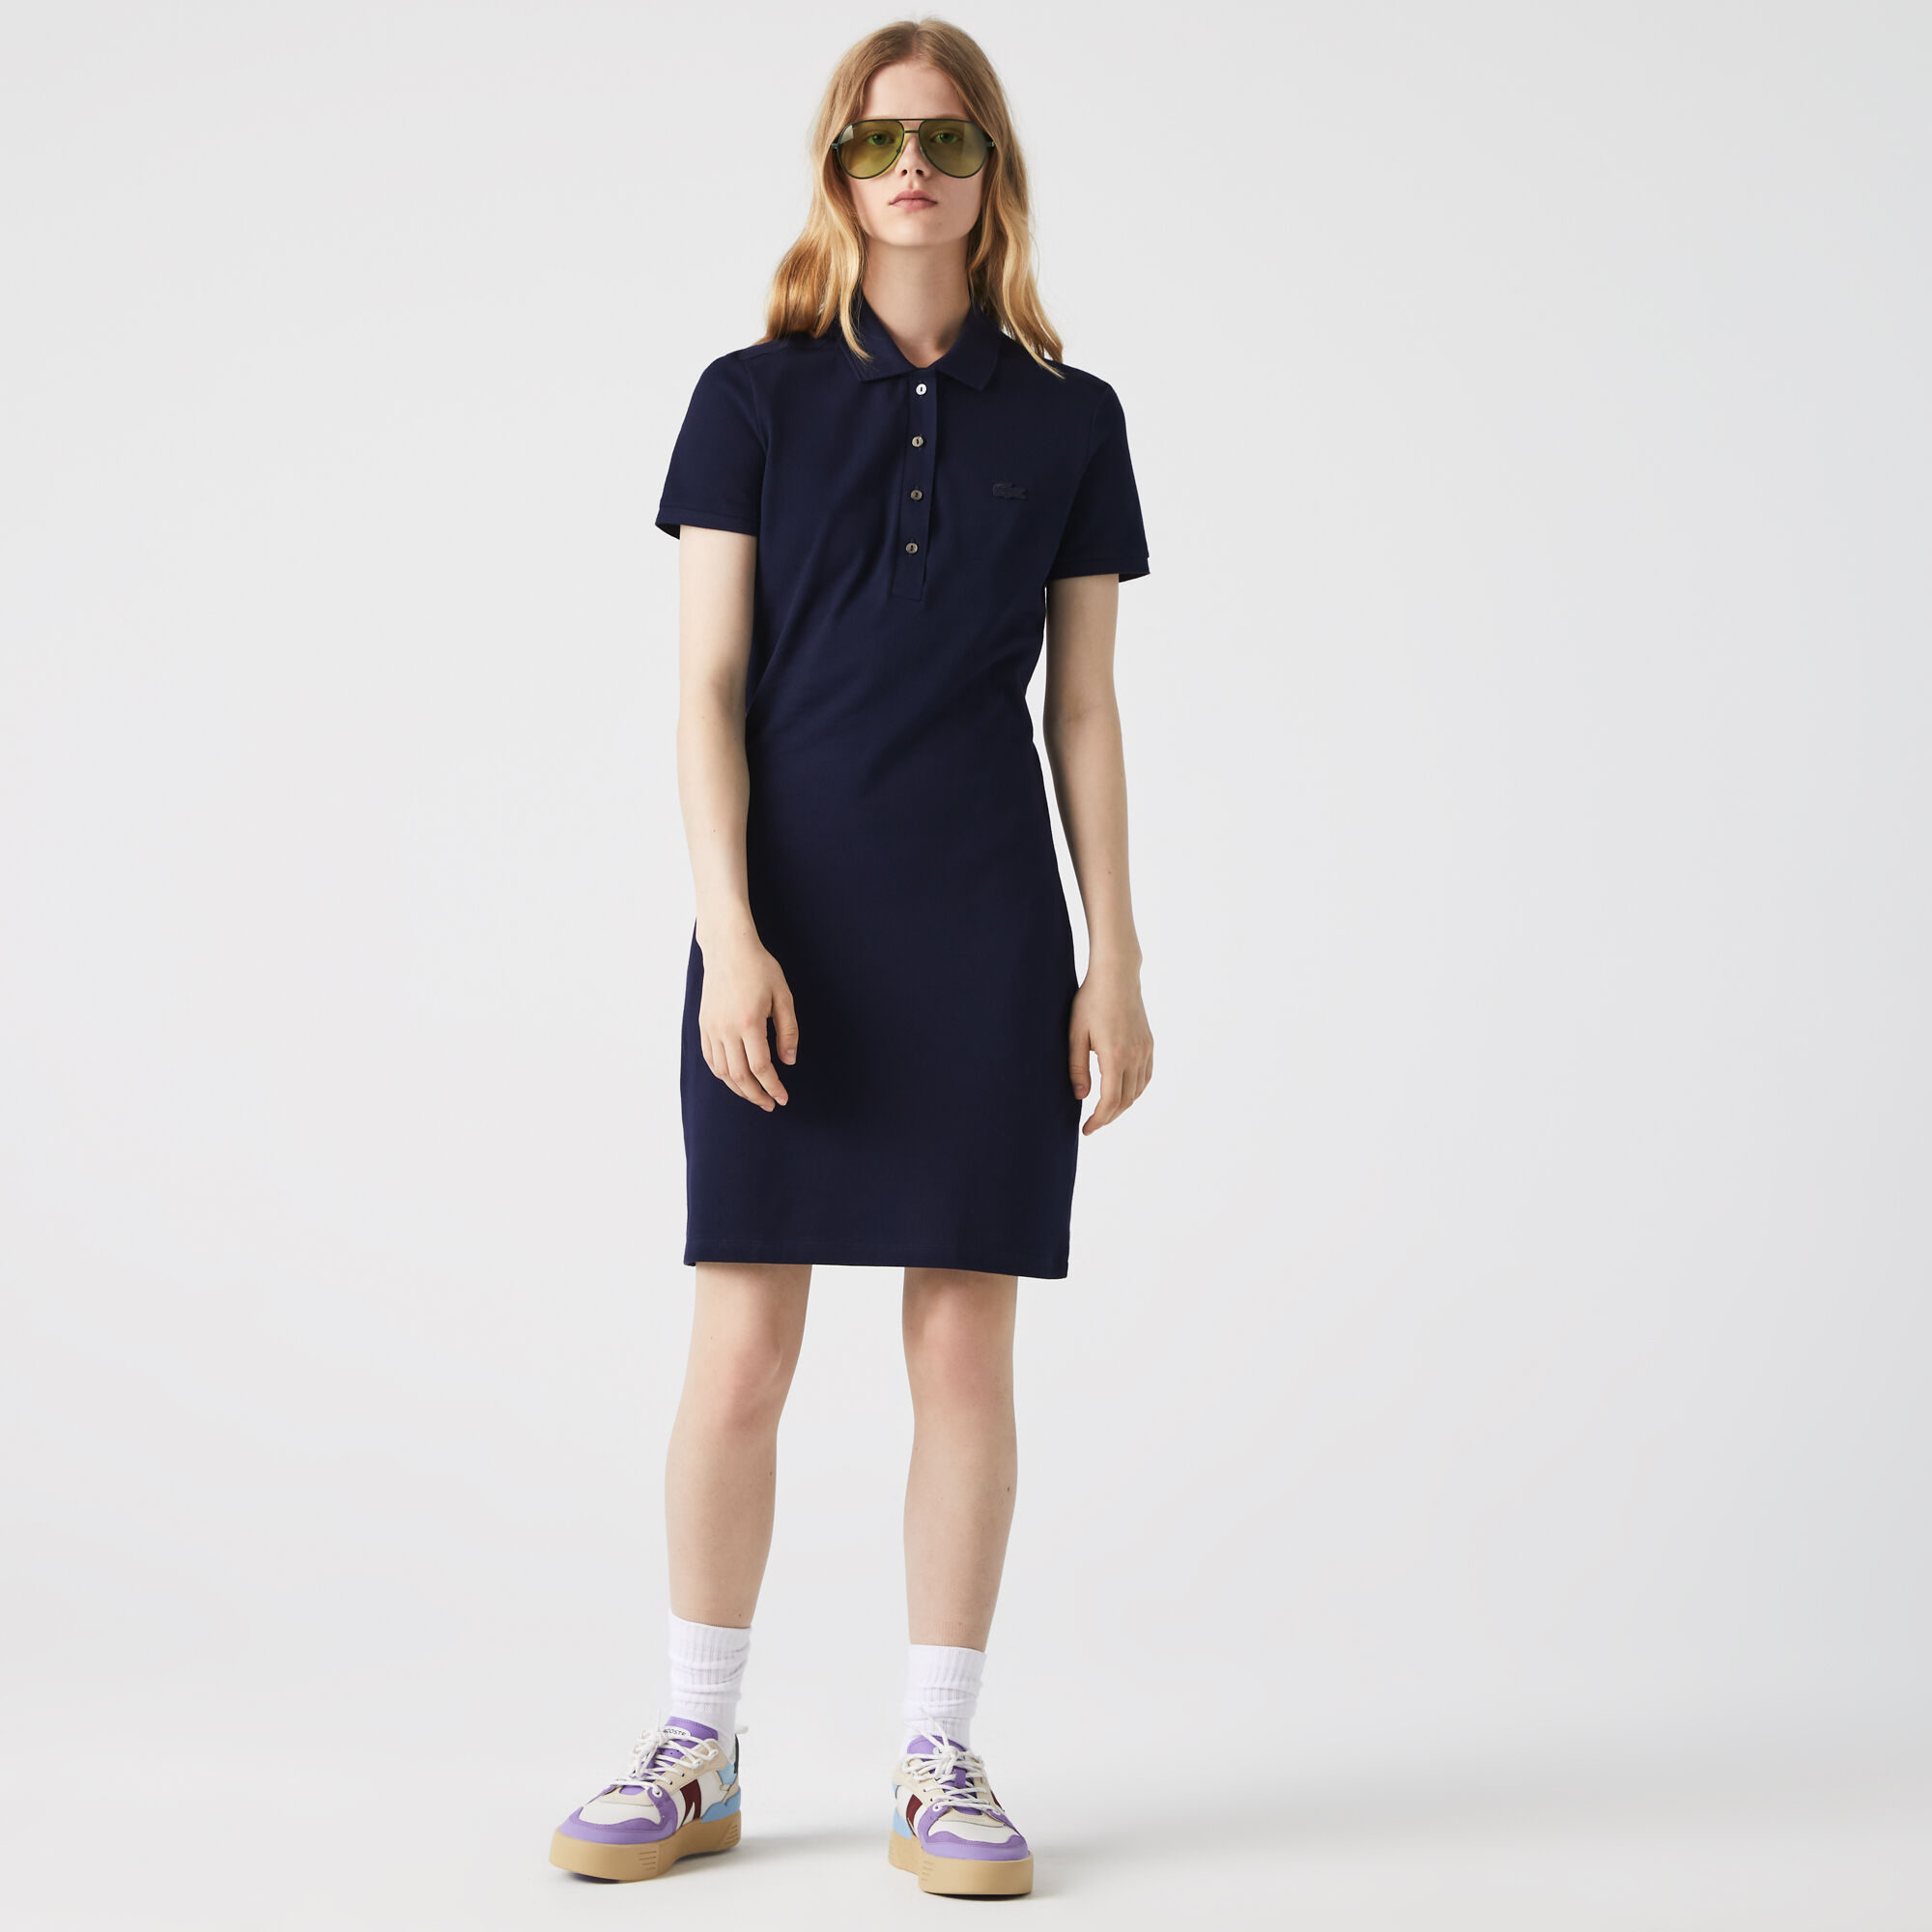 Pleated Skirts For Women | T-Shirt Dresses | Polo Dresses